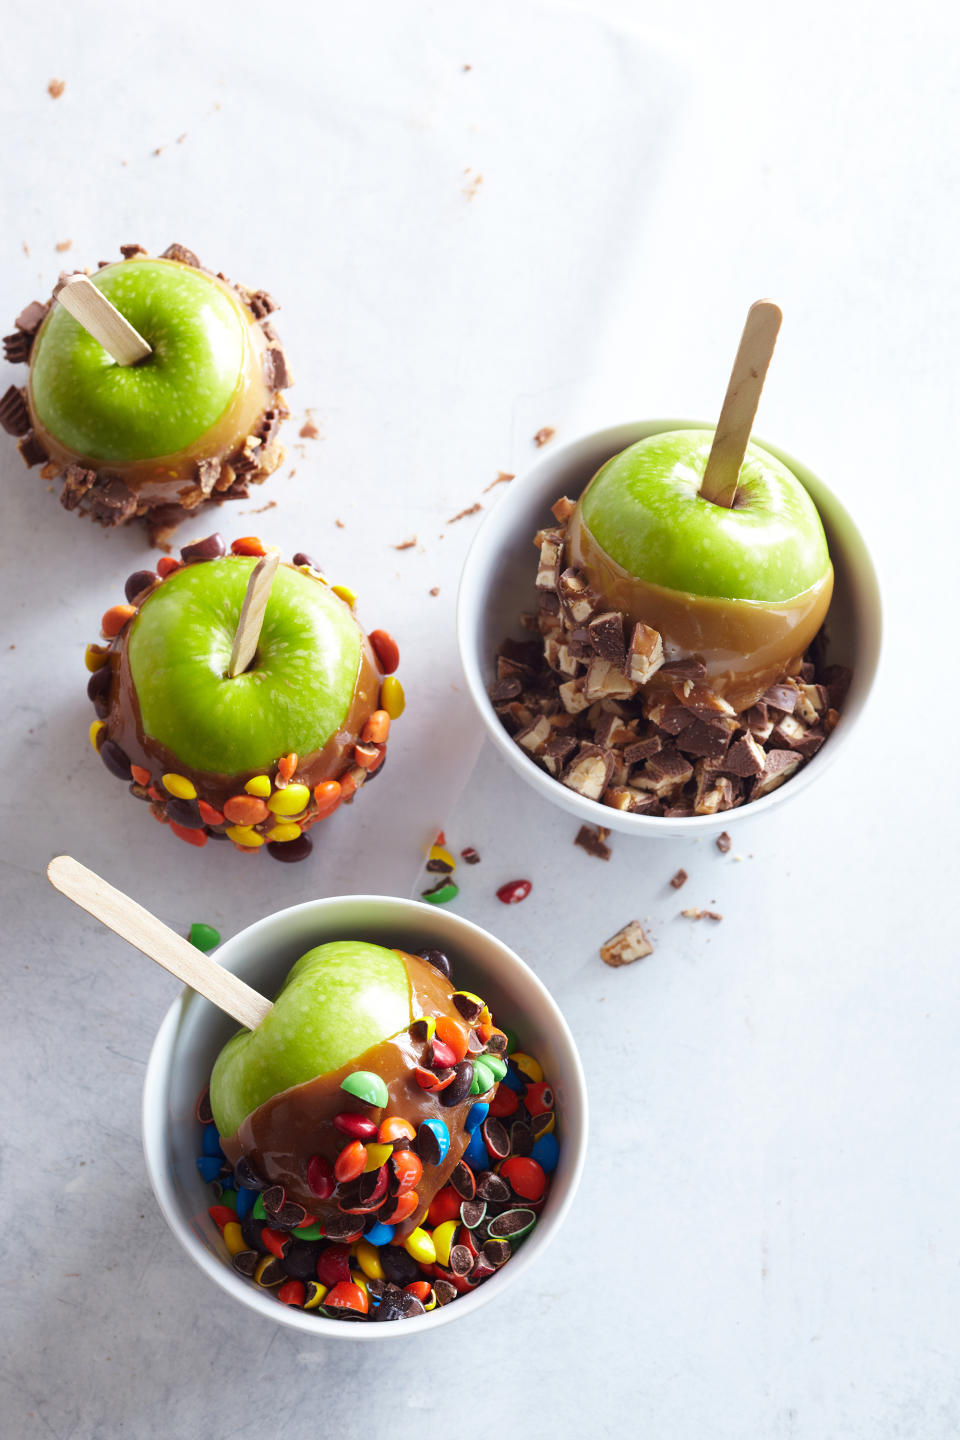 This photo supplied by Better Homes & Gardens shows a selection of caramel apples. The classic caramel apple makes a fun party activity, says Southern Living’s senior lifestyle producer Ivy Odom. Set up a bar with full apples or chunky slices, a crockpot of melted caramel, and toppings to sprinkle or dip. (Blaine Moats/Better Homes & Gardens via AP)